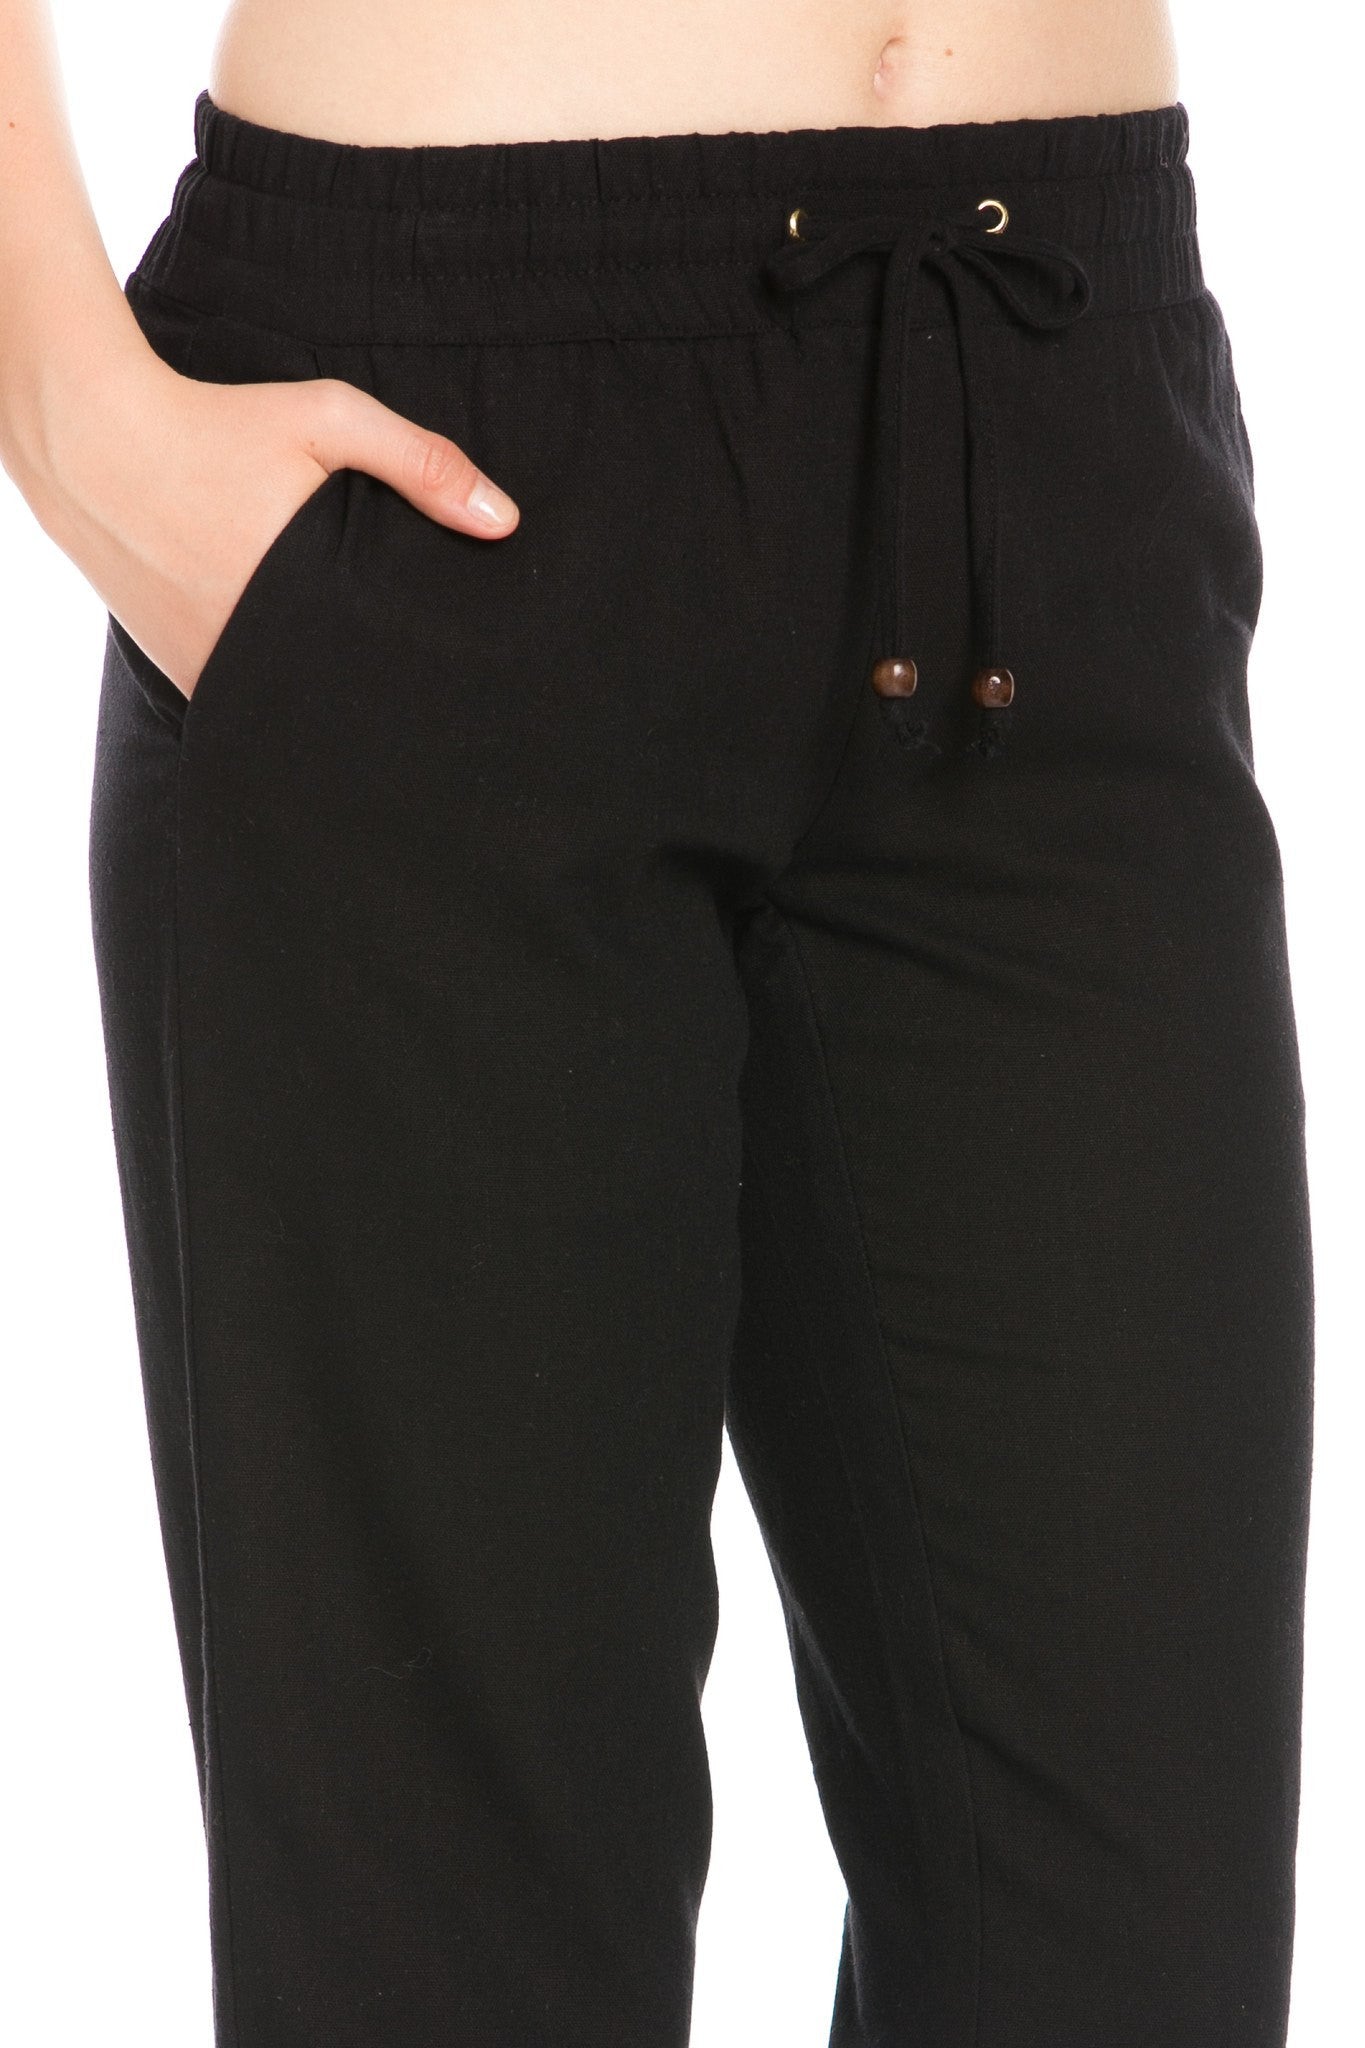 Comfy Drawstring Linen Pants Long with Band Waist (Black) - Poplooks